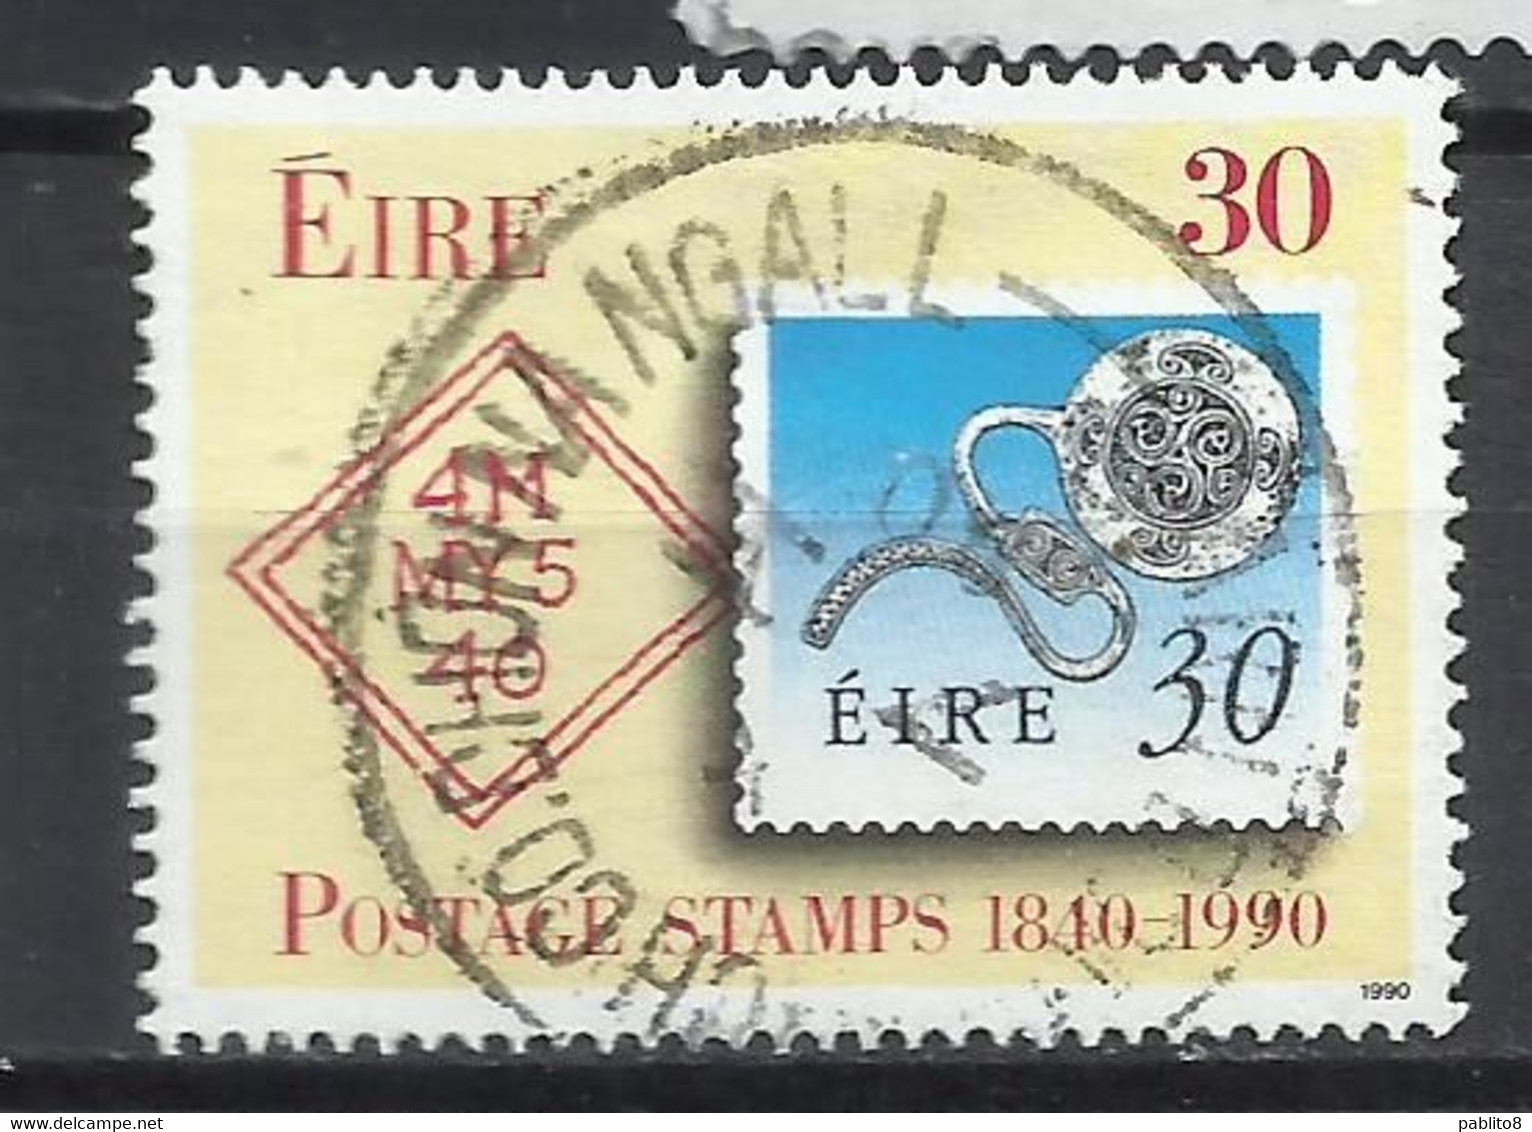 EIRE IRELAND IRLANDA 1990 PENNY BLACH 150 ANNIVERSARY 30p USED USATO OBLITERE' - Used Stamps